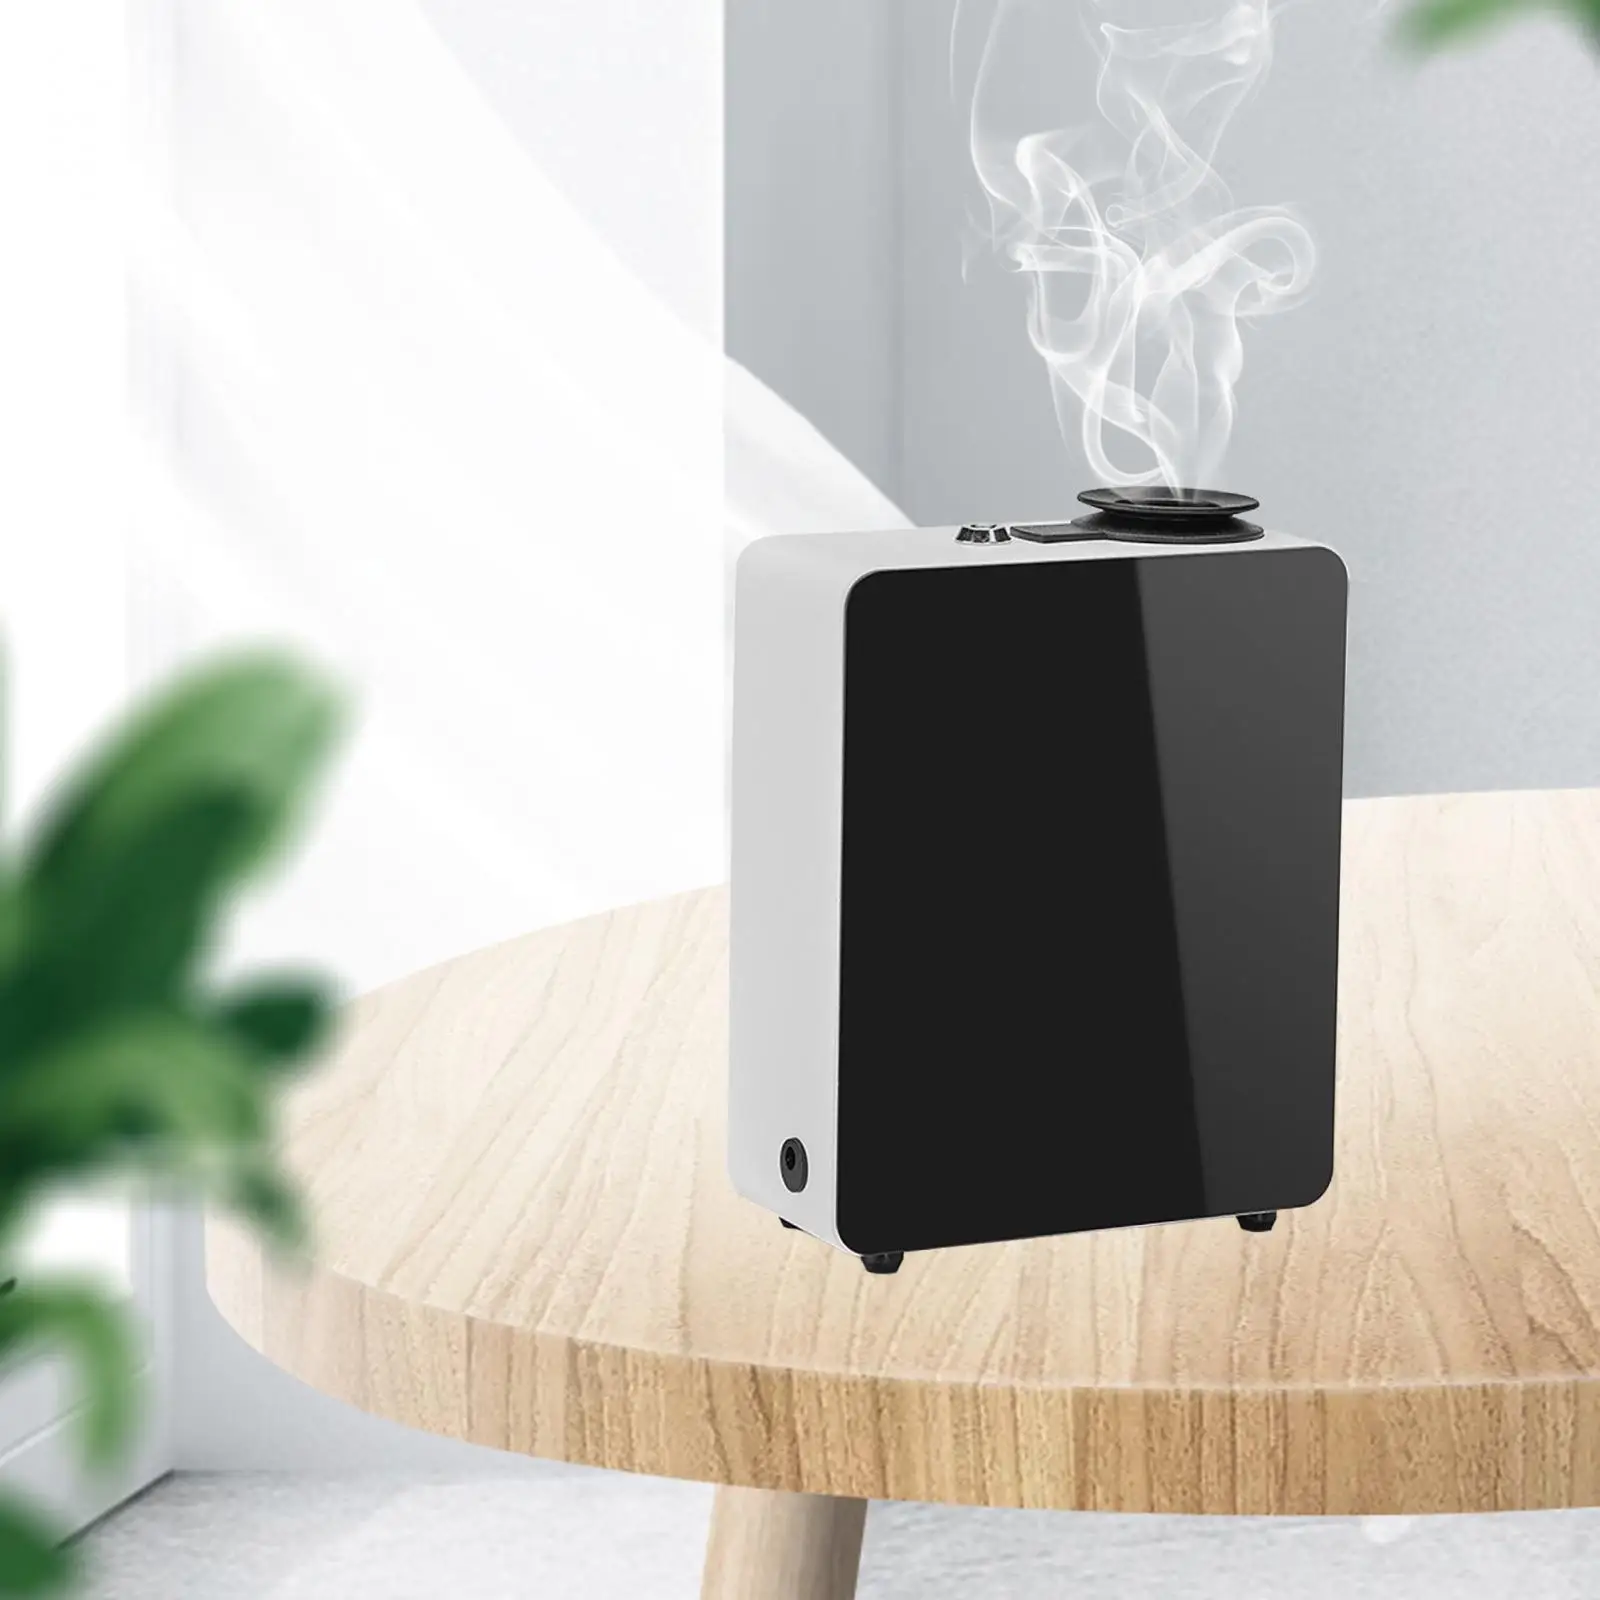 Essential Oil Diffuser Wall Mount or Desktop Easy to Use Fine Mist Scent Machine for Yoga Office Bedroom Living Room Hotel